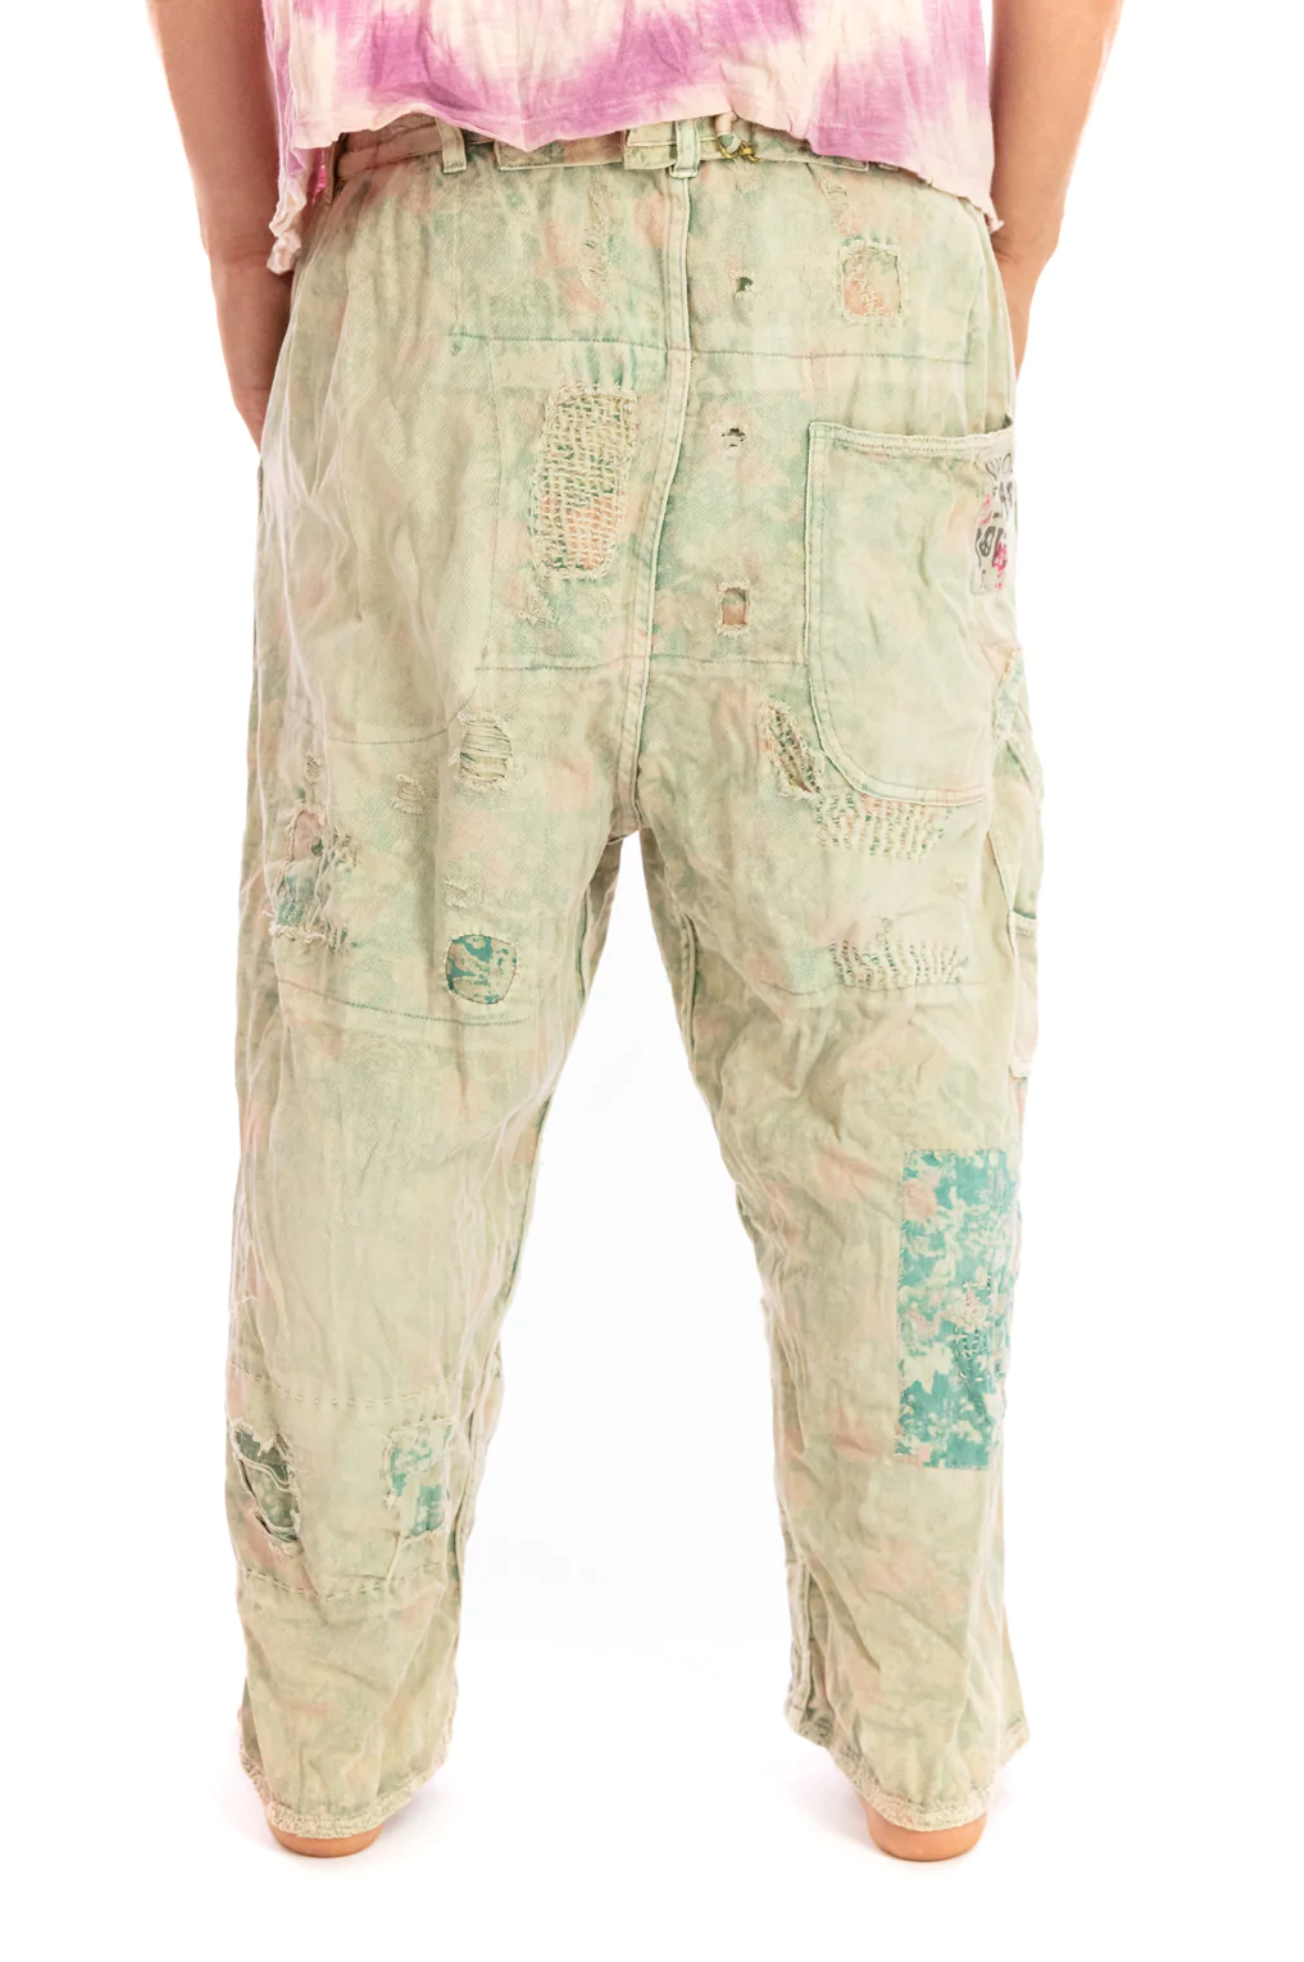 Pants 346 Sea Flower Audie Overalls Trousers O/S